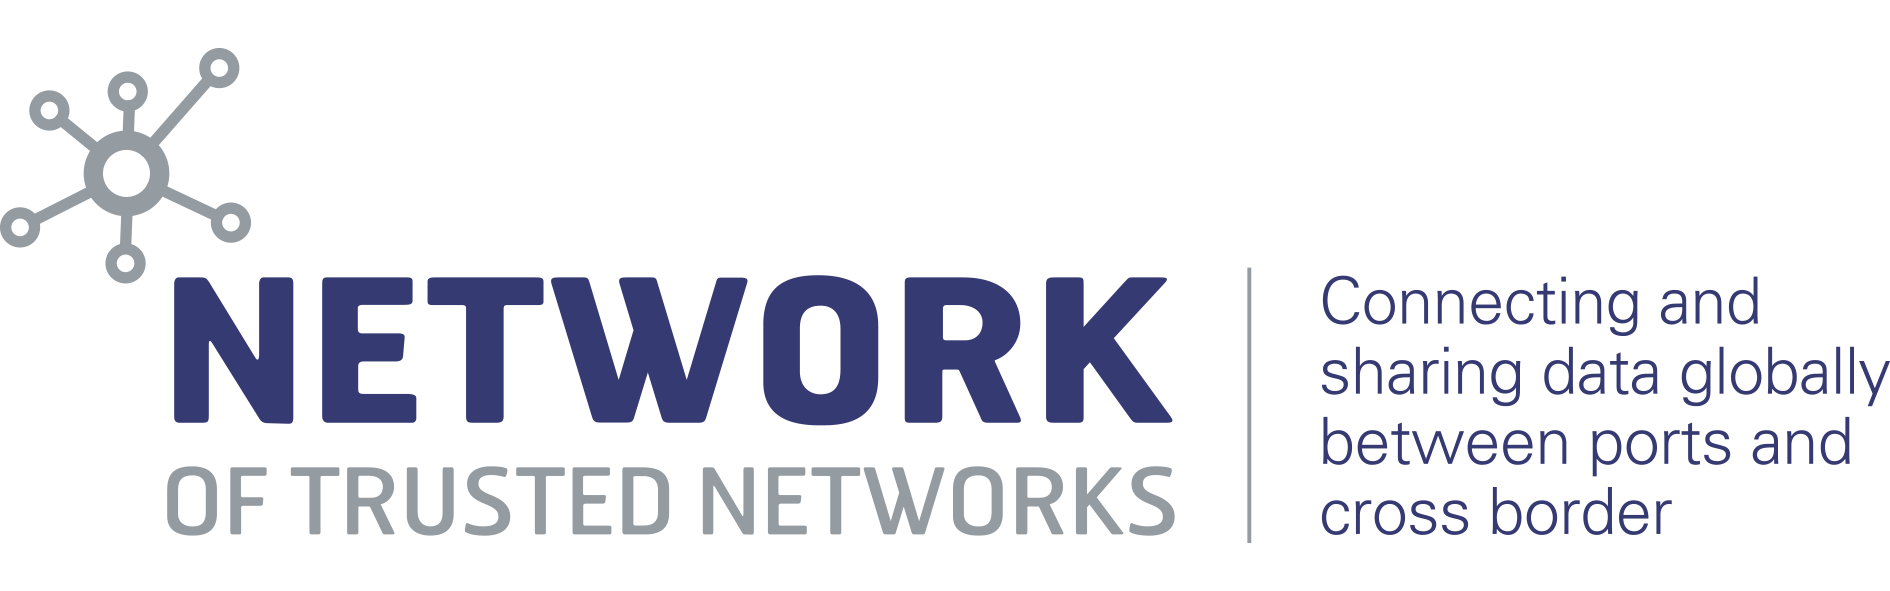 Network of Trusted Networks – IPCSA International